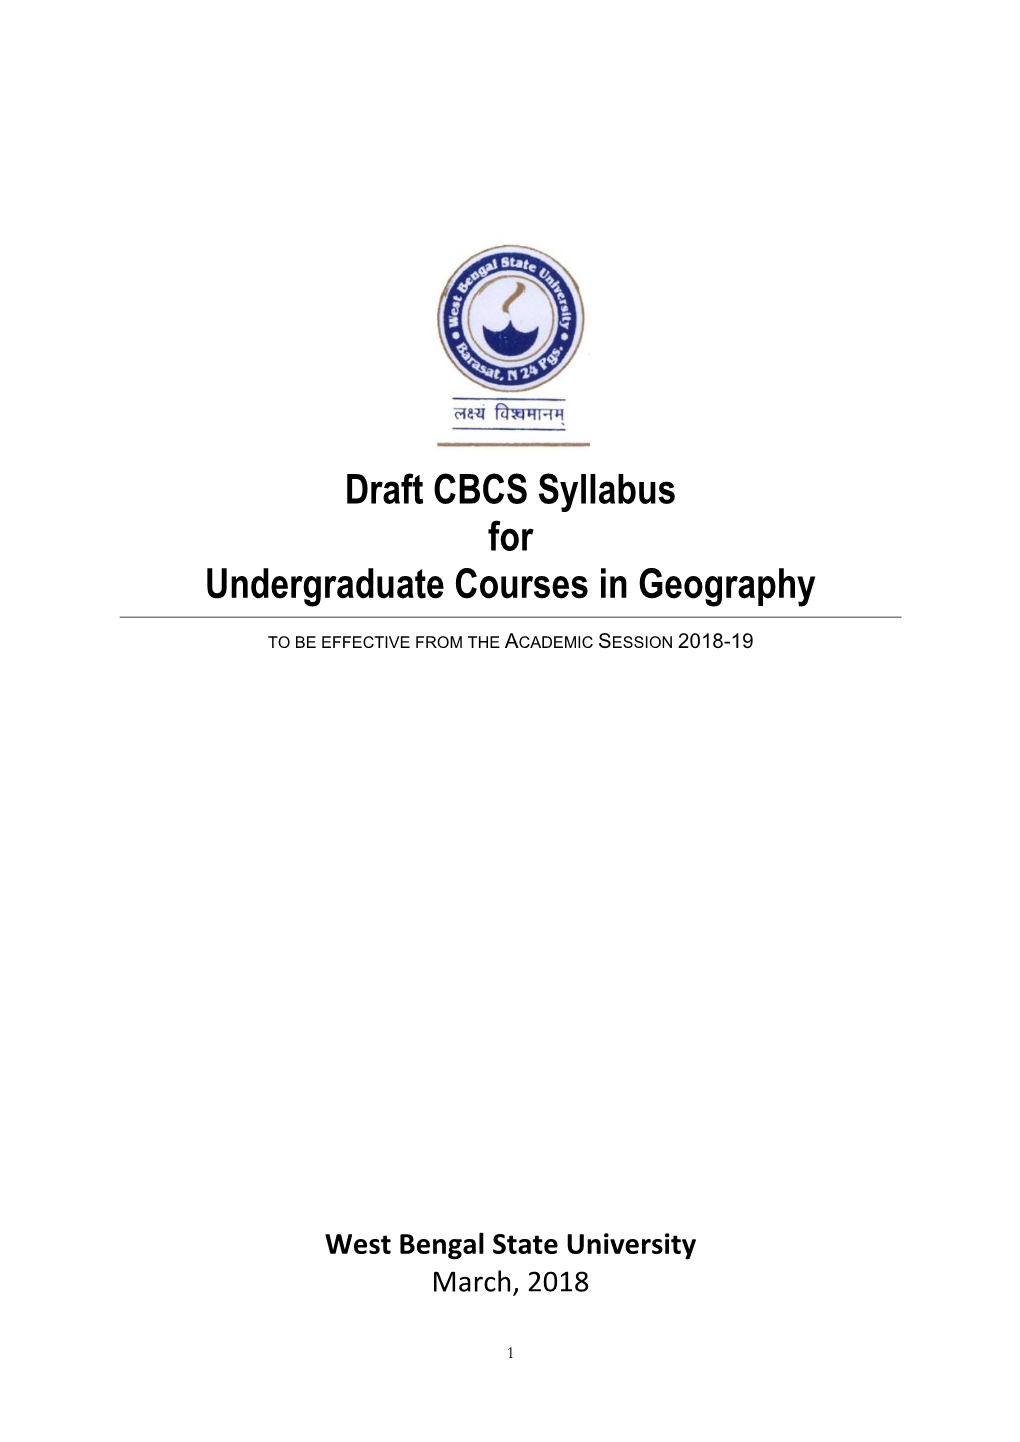 Draft CBCS Syllabus for Undergraduate Courses in Geography